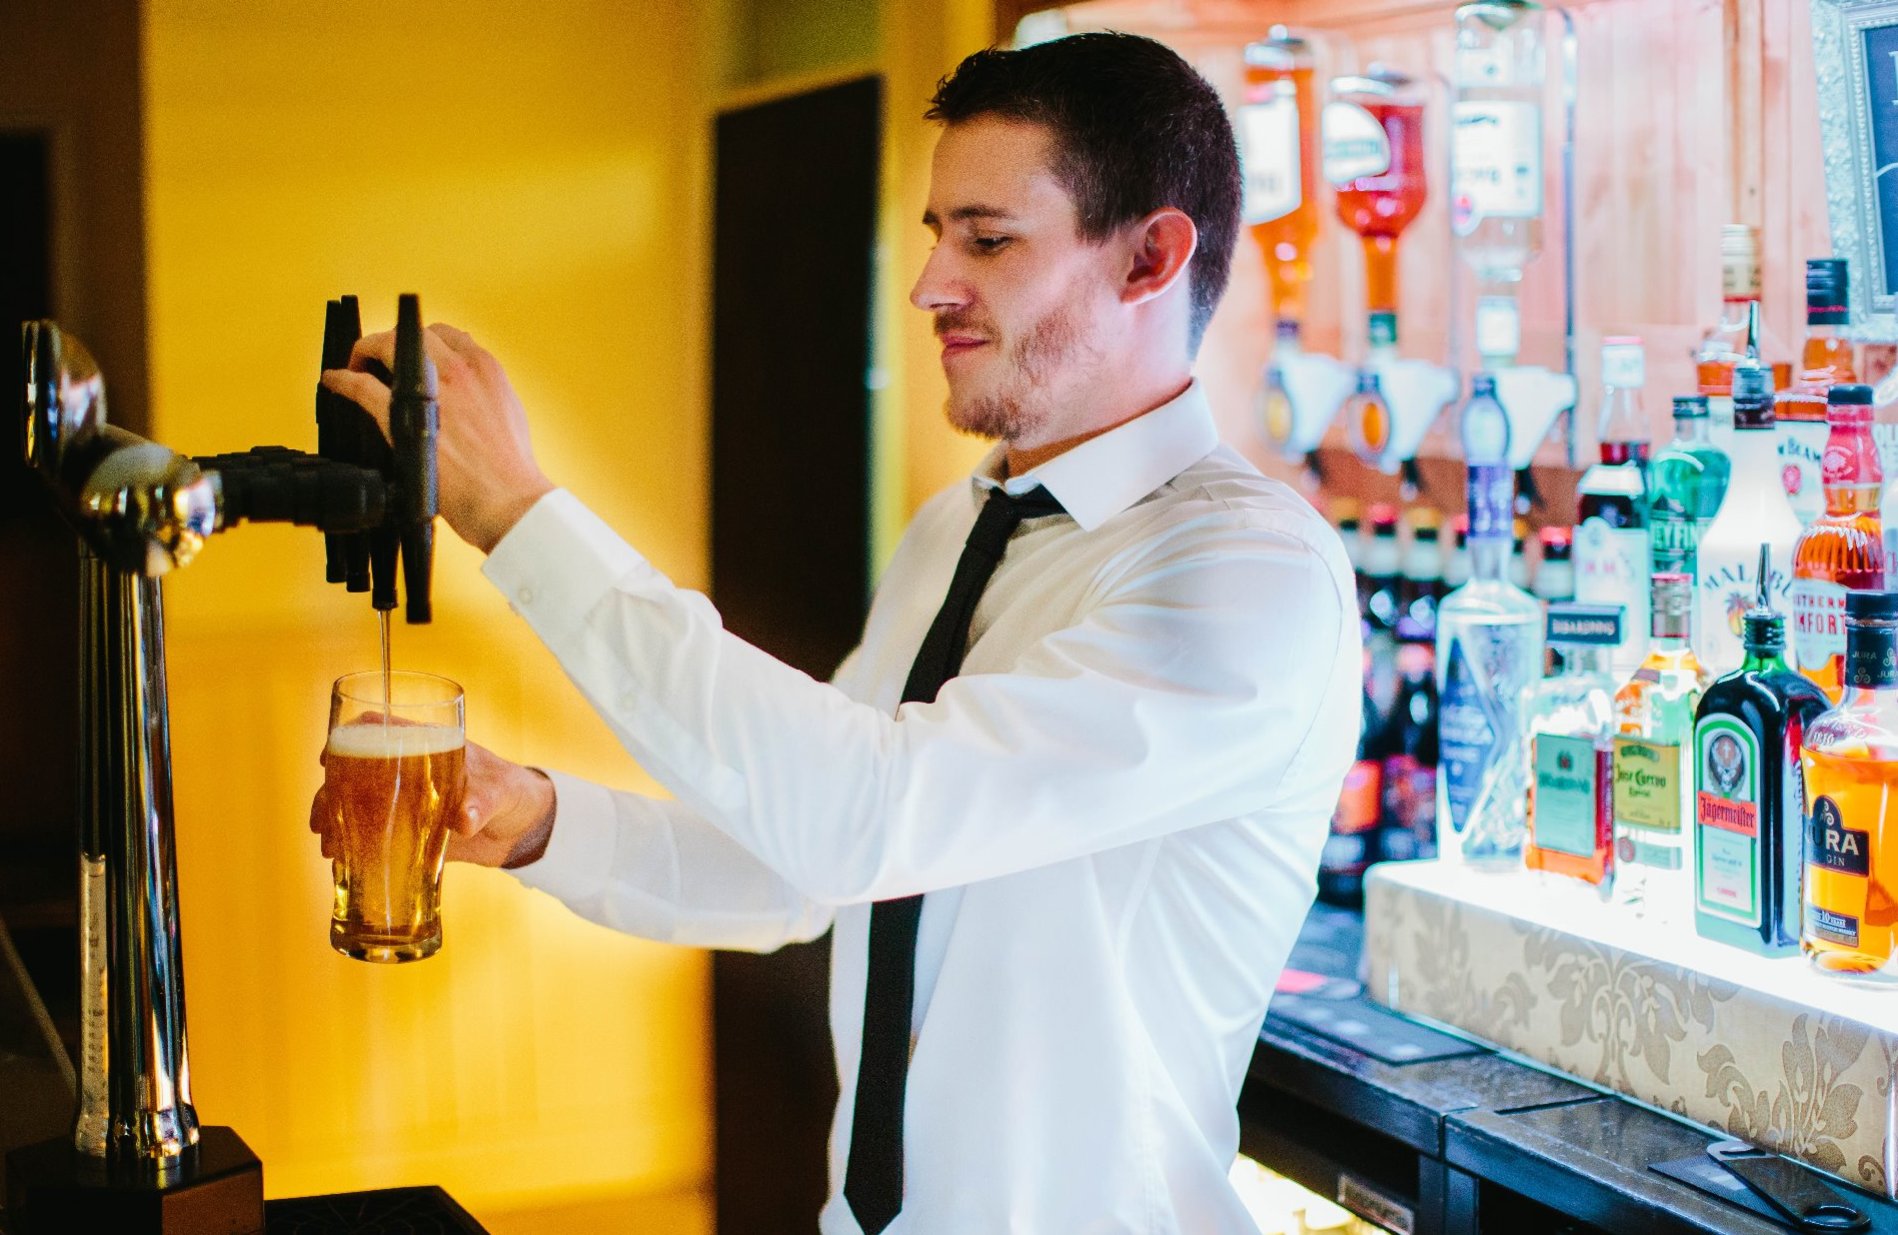 Bartender pouring a pint of beer